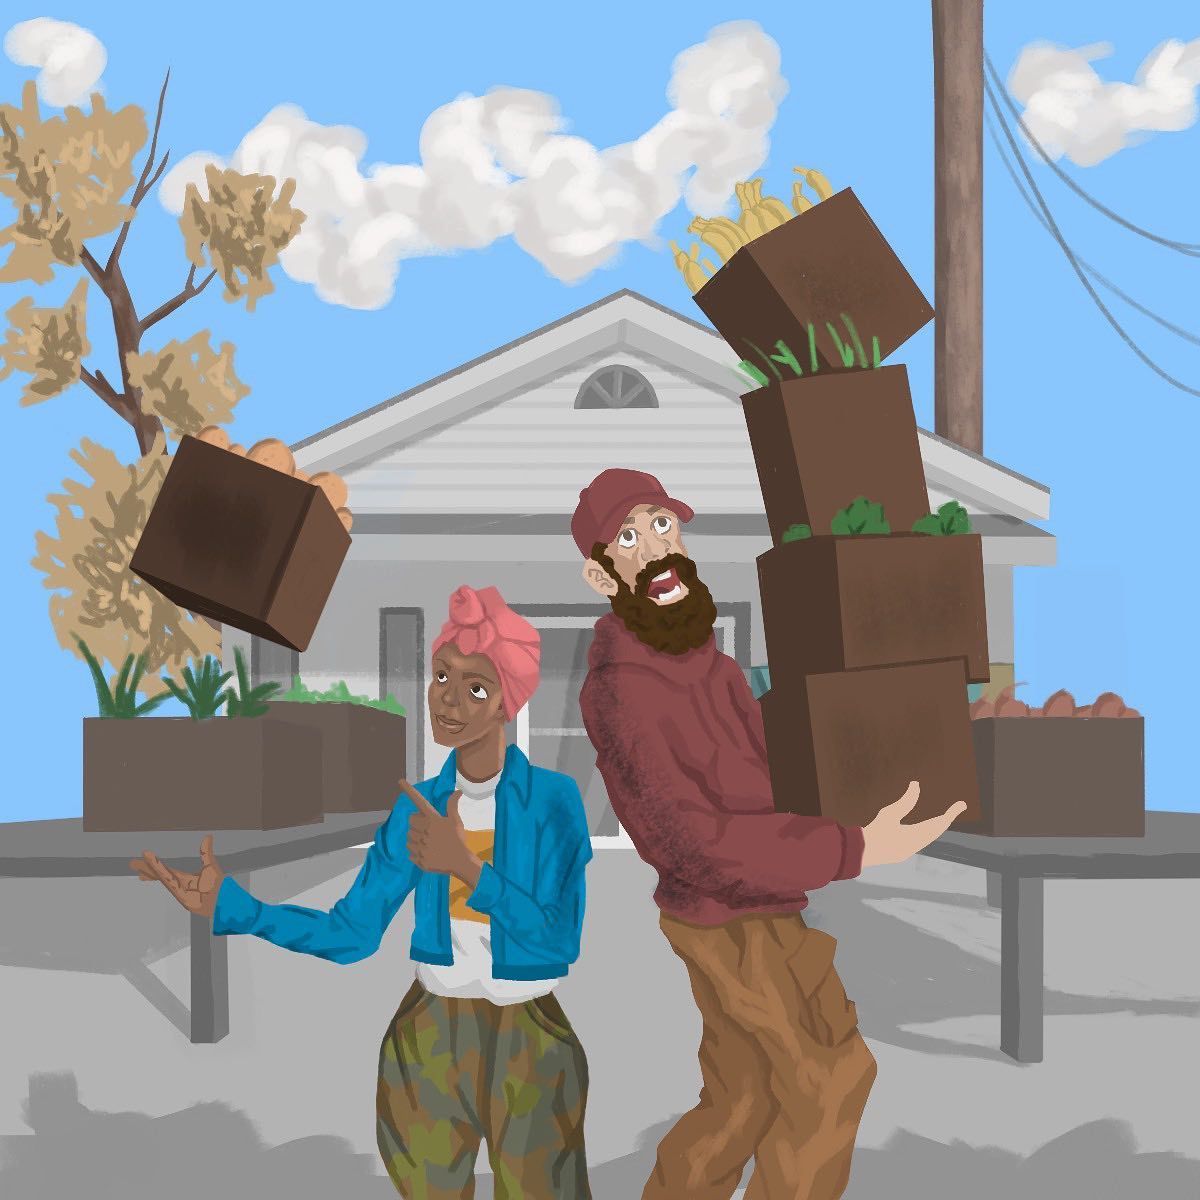 An illustration of a man and a woman holding stacks of boxes filled with groceries.